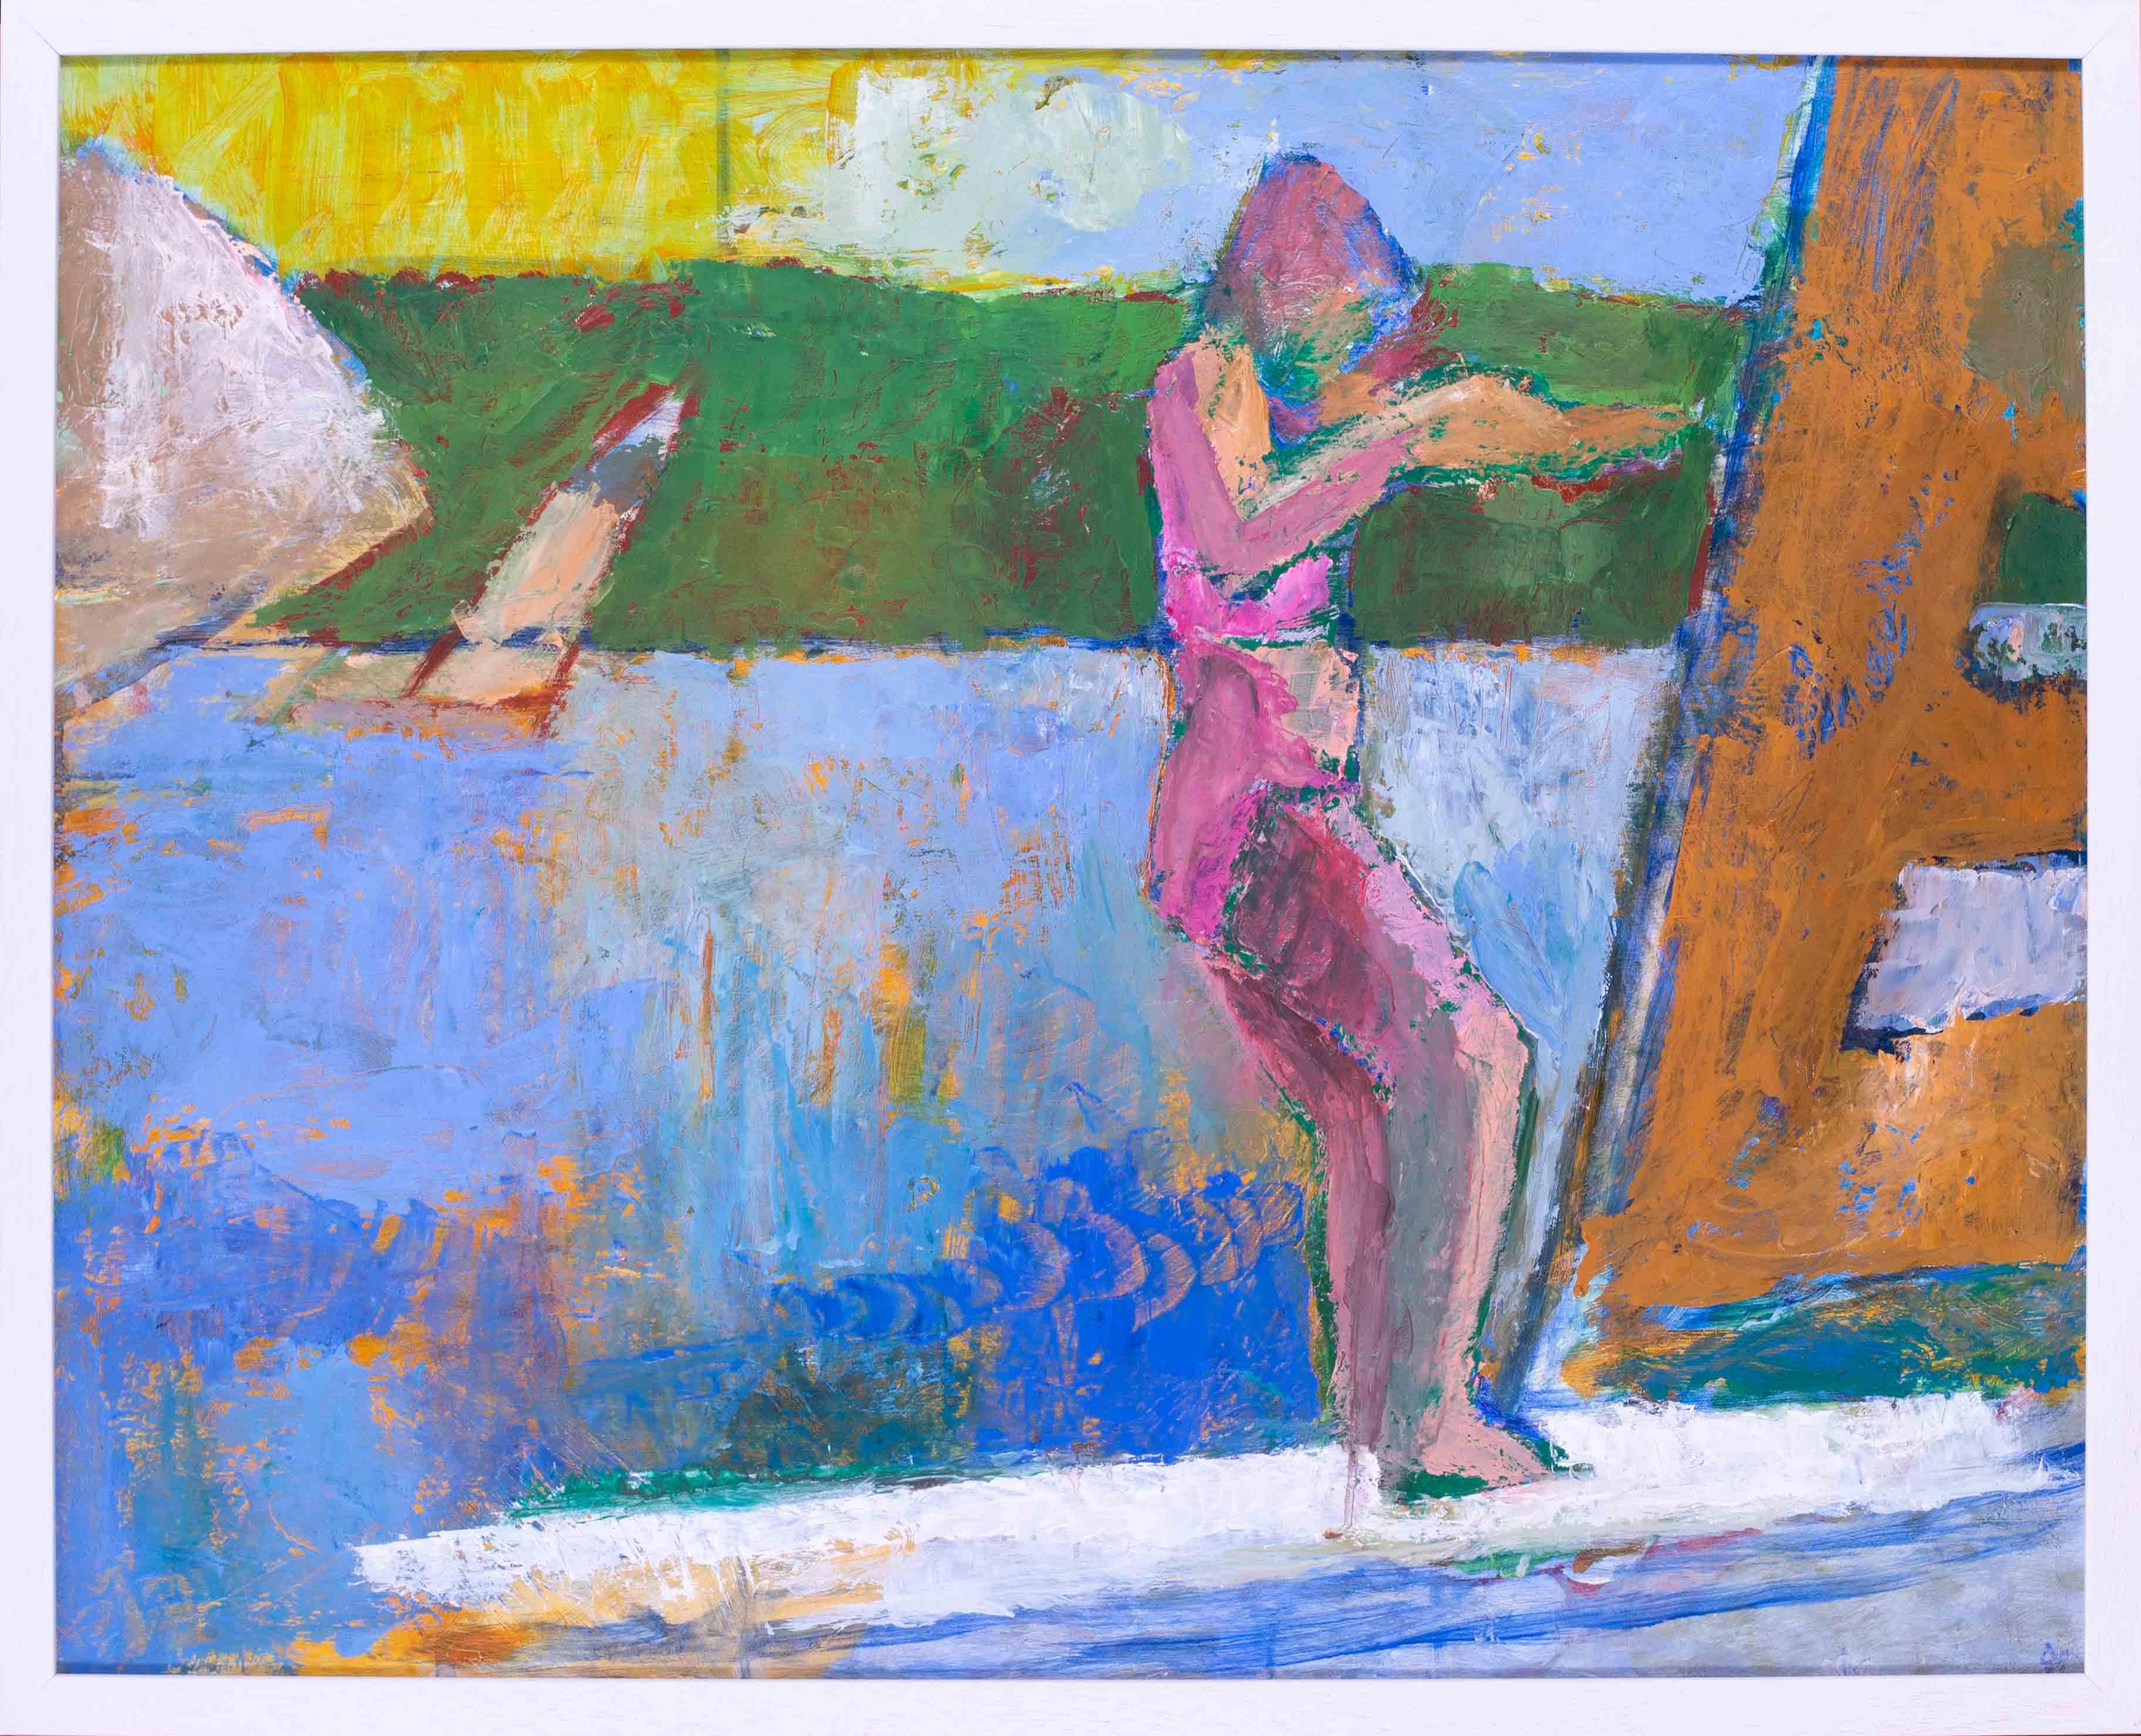 A fine painting by Ewart Johns portraying a girl windsurfing in a Modern British style with Fresh colours, bold brushstrokes and a sense of energy and dynamism.  The work captures the essence of the subject matter in a visually captivating manner.